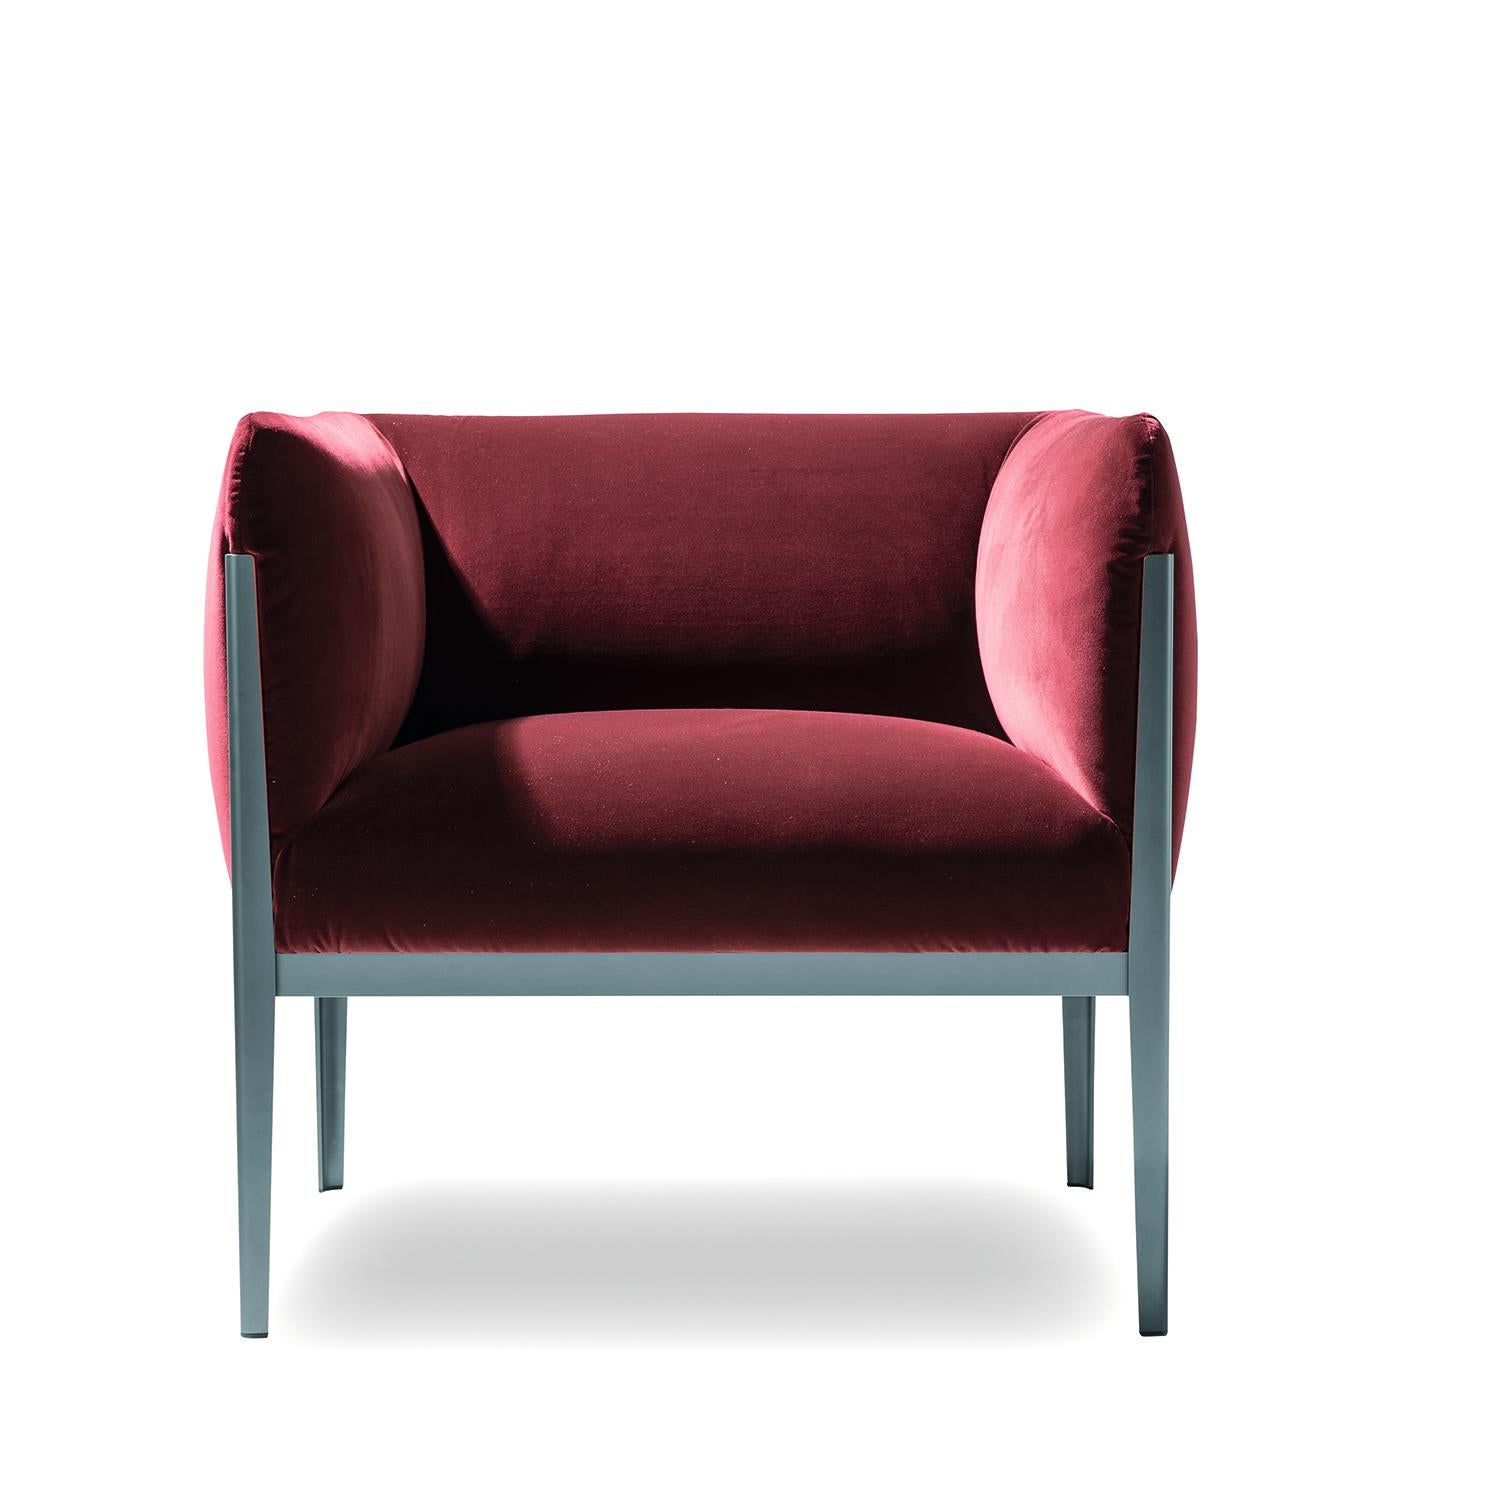 Italian Ronan & Erwan Bourroullec 'Cotone' Armchair Set, Aluminum and Fabric by Cassina For Sale